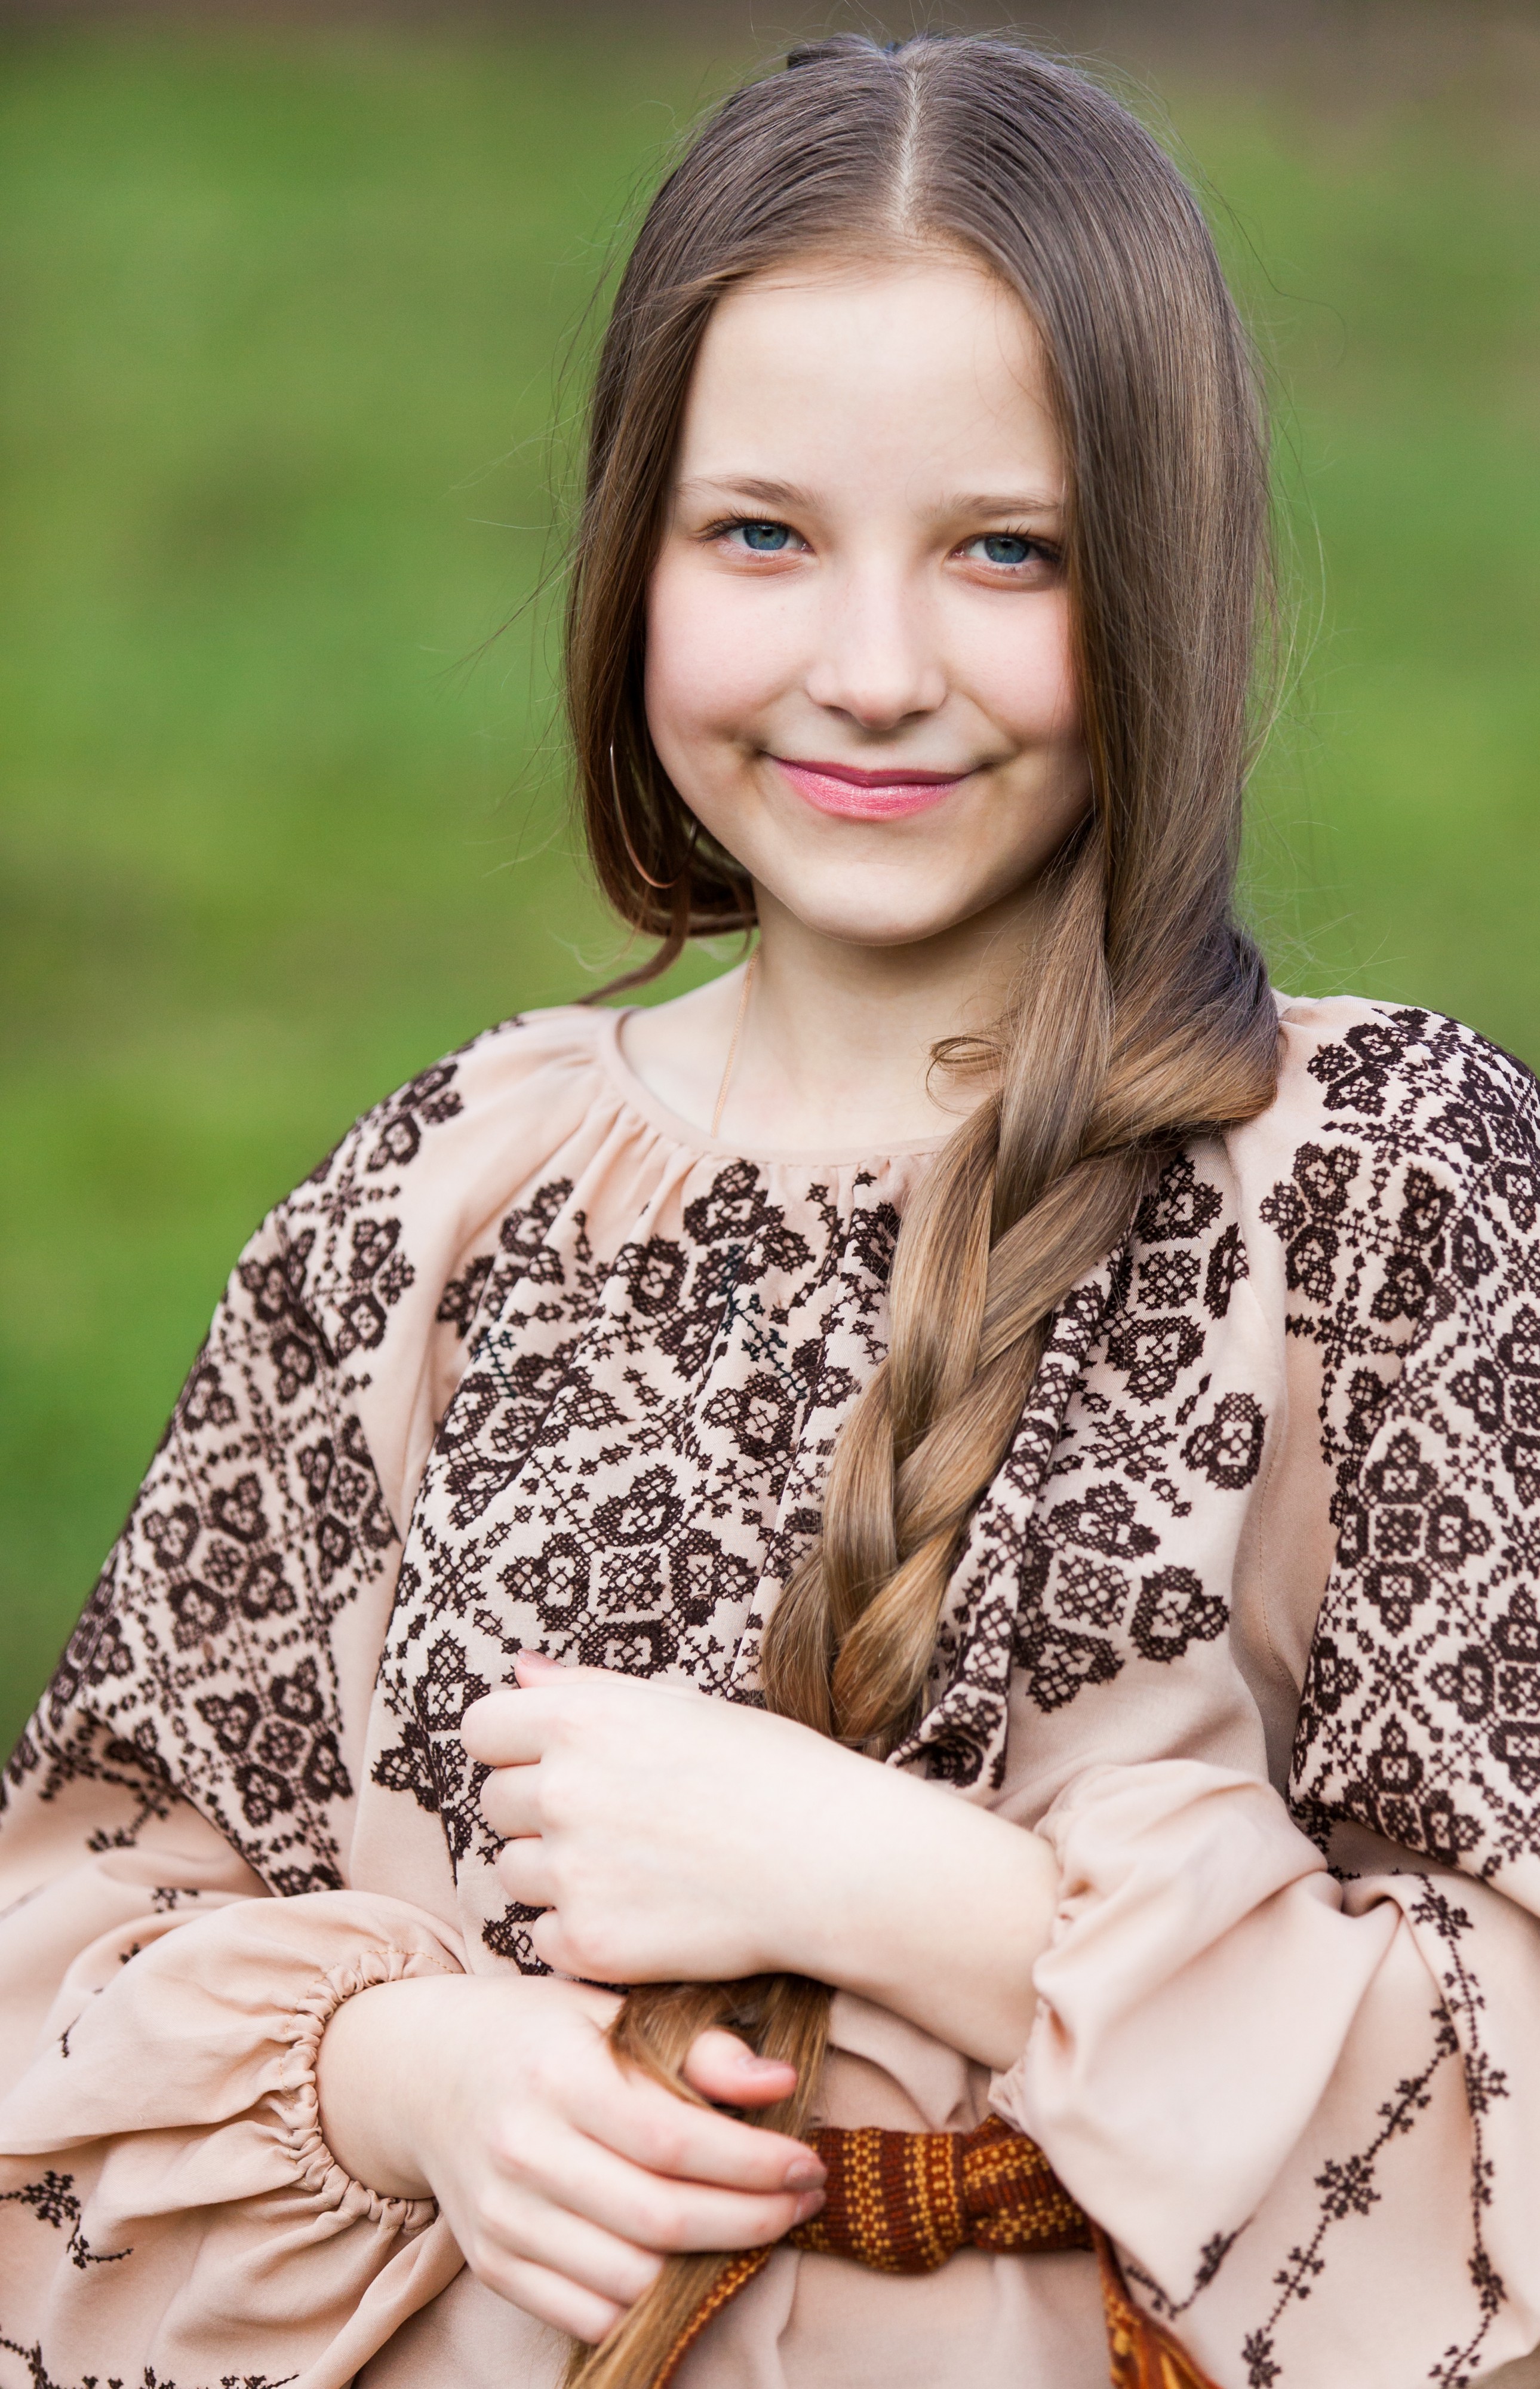 a 12-year-old girl photographed in April 2015, picture 7